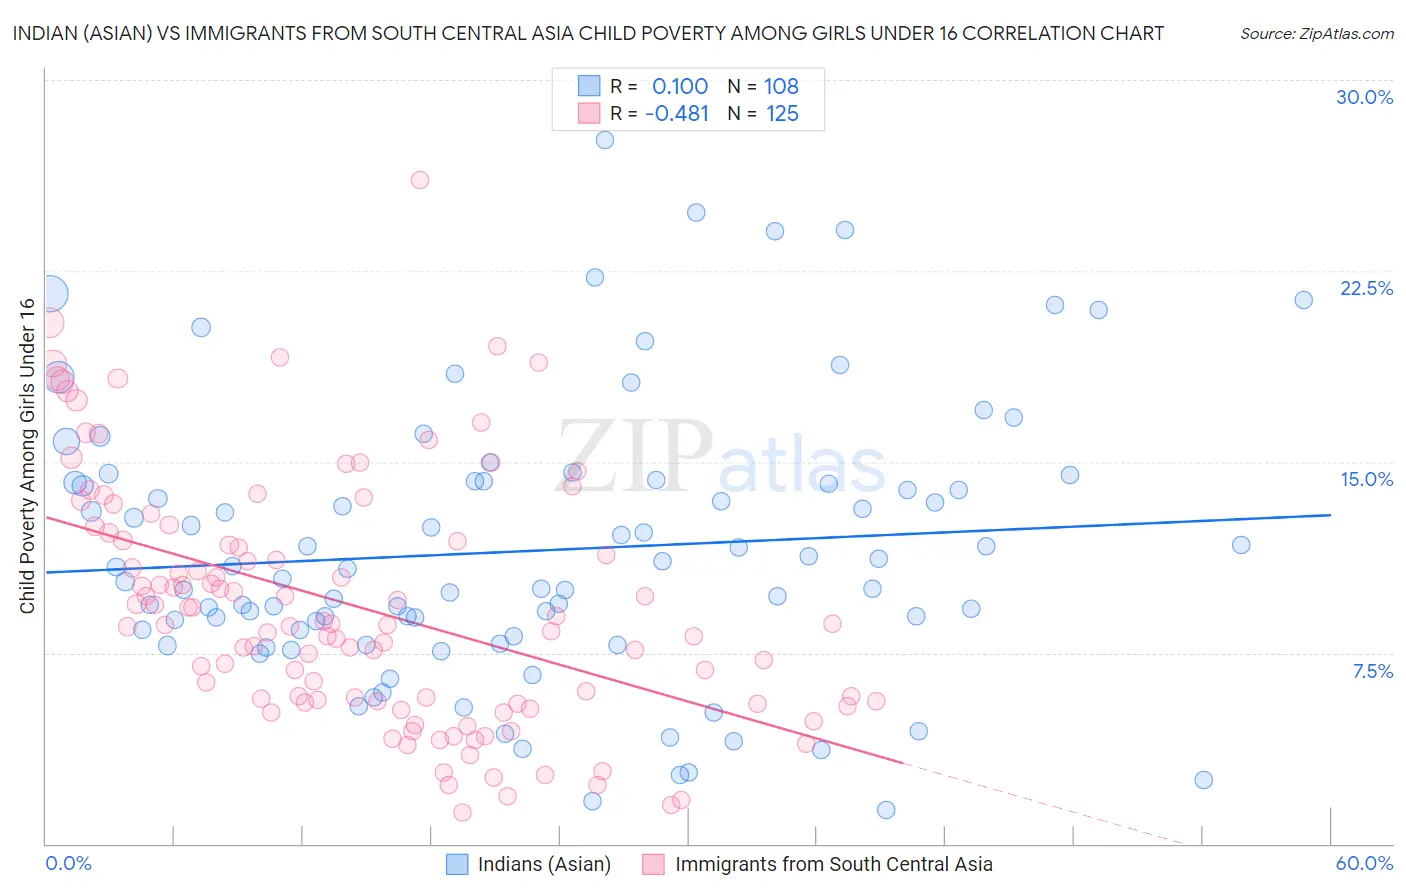 Indian (Asian) vs Immigrants from South Central Asia Child Poverty Among Girls Under 16